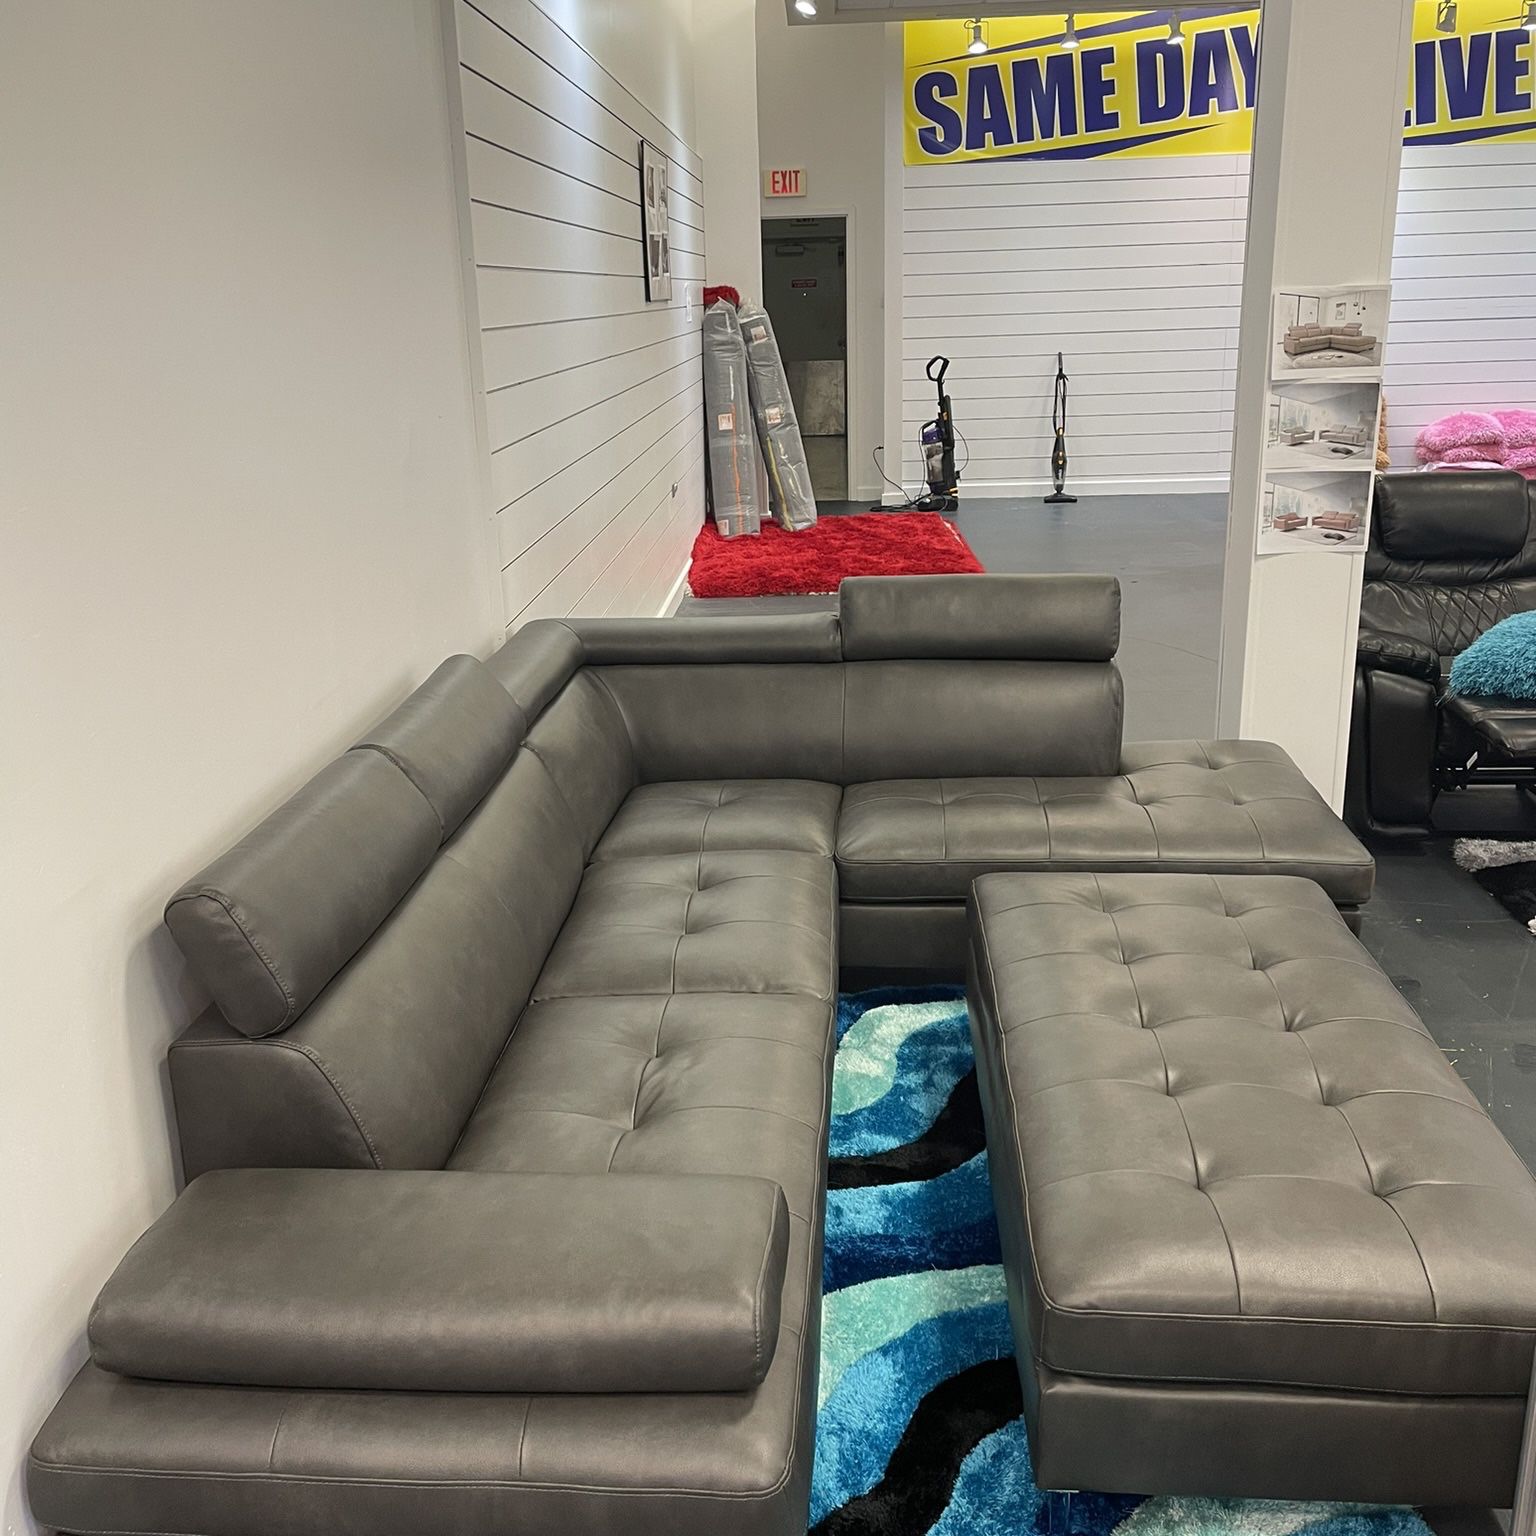 Ibiza Gray Sectional With Ottoman Only $799. Easy Finance Option. Same-Day Delivery.